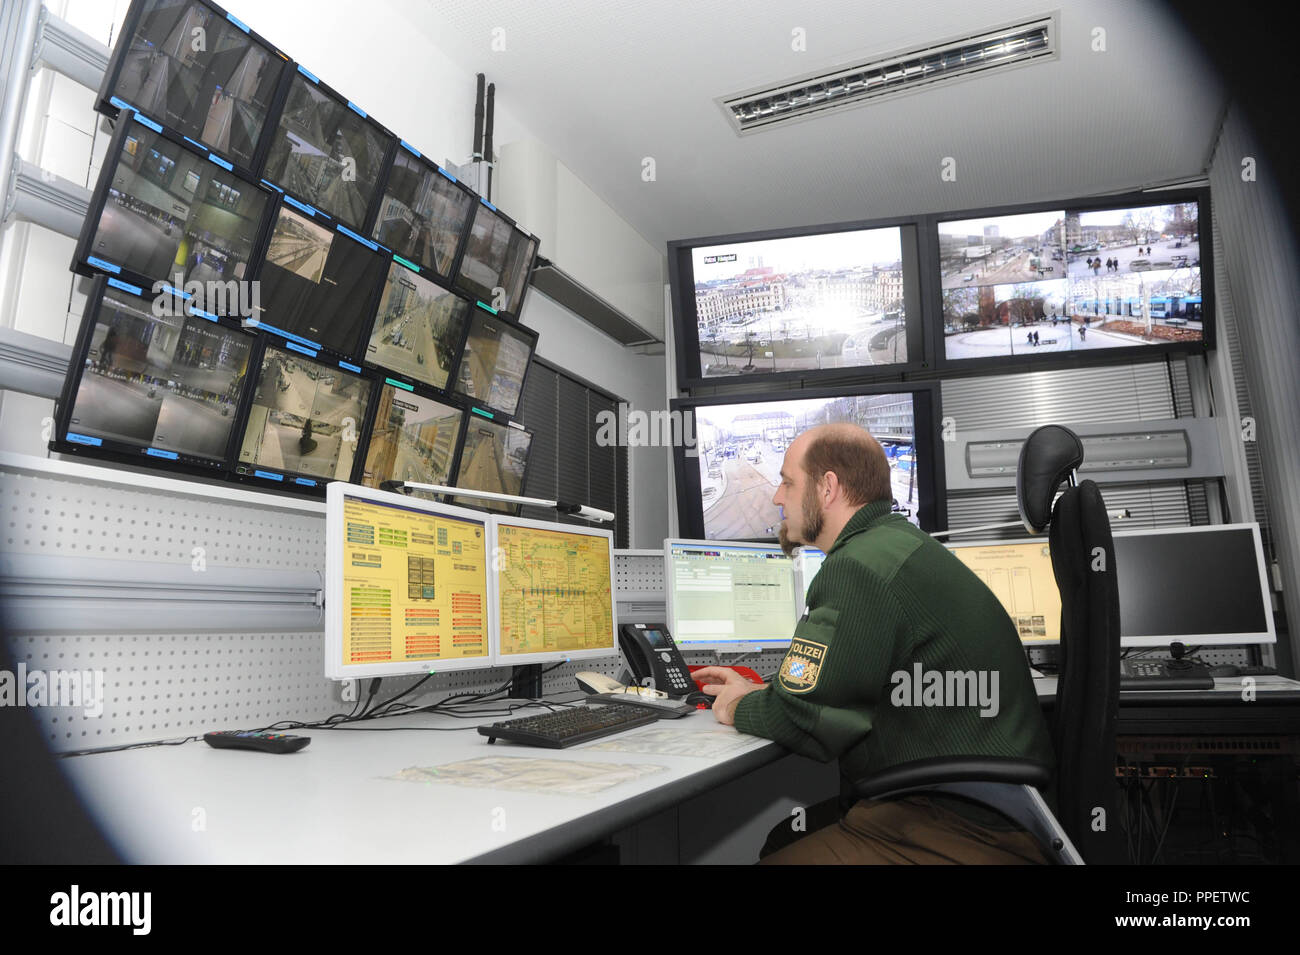 A police officer monitors the happenings at train stations and public places in the video surveillance room of the Operations Centre at the Munich Police Headquarters. Stock Photo